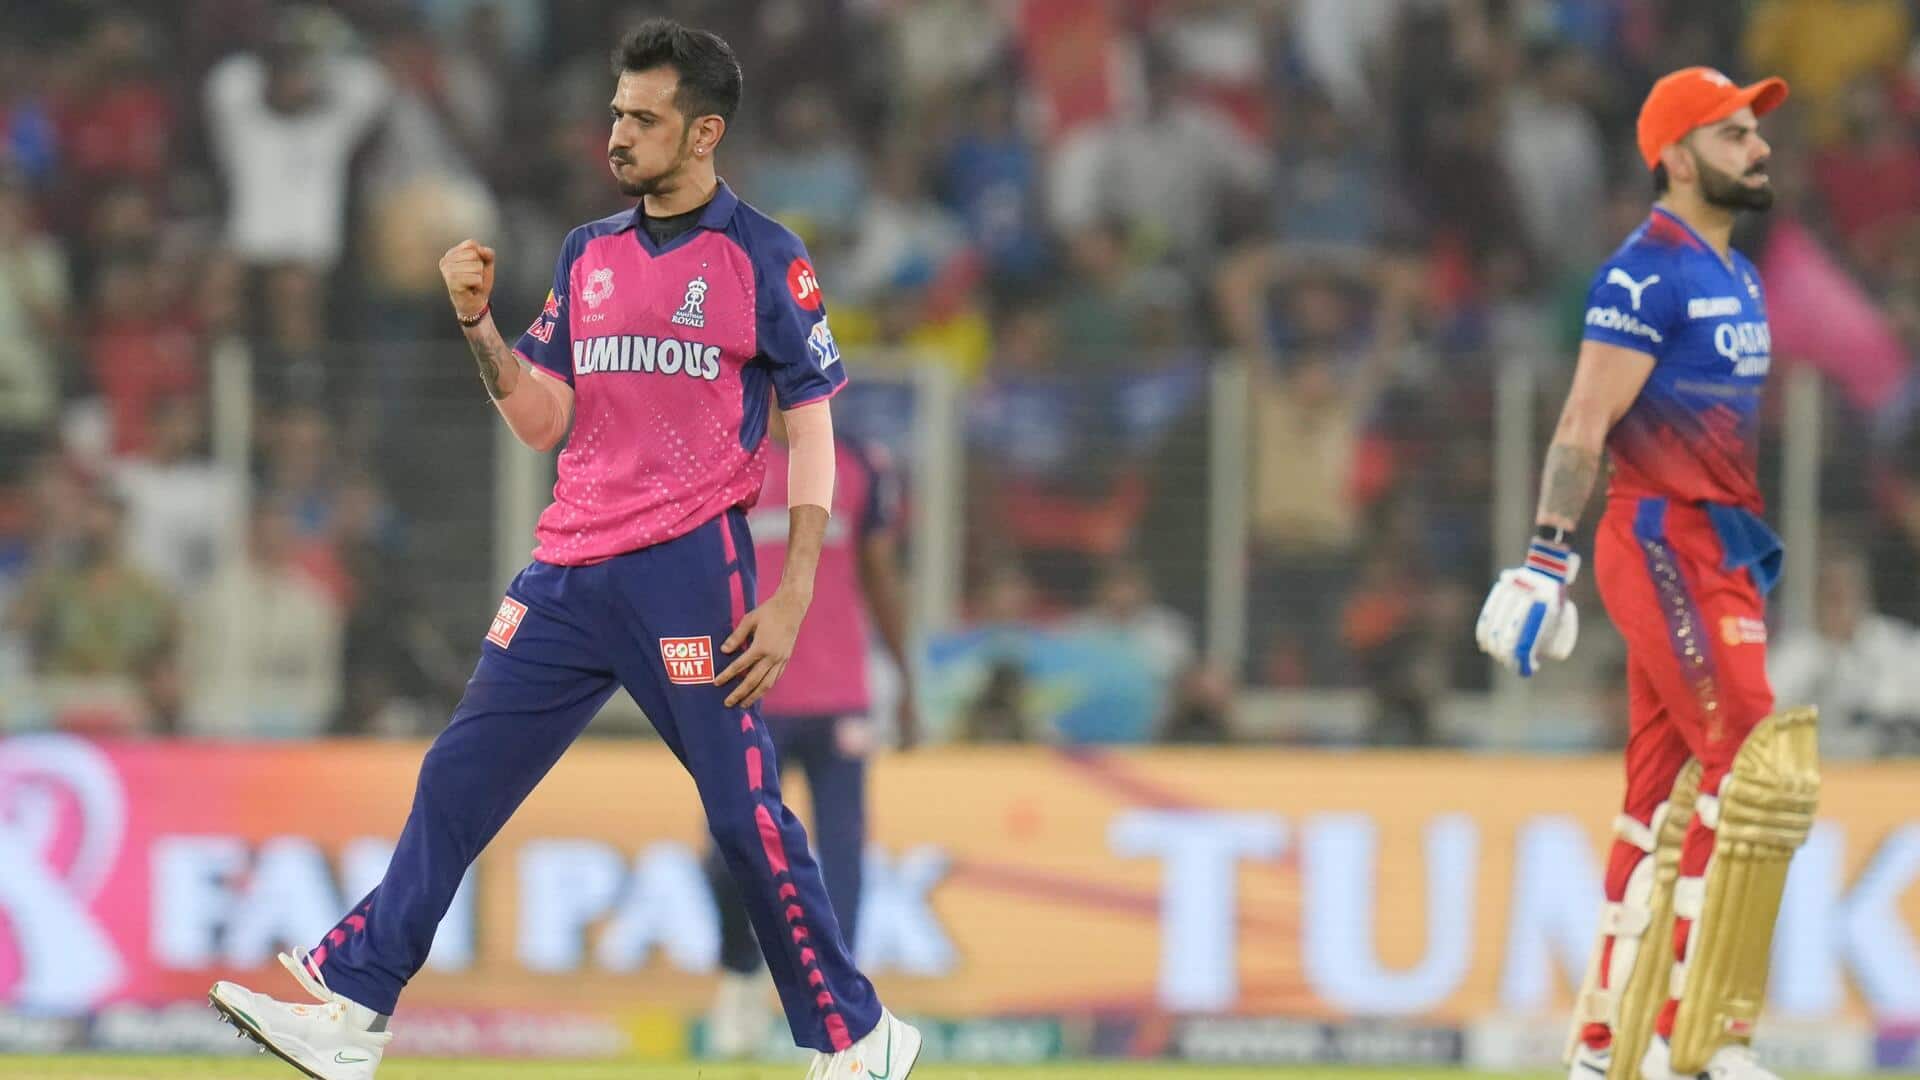 Yuzvendra Chahal concedes most sixes in IPL history: Stats